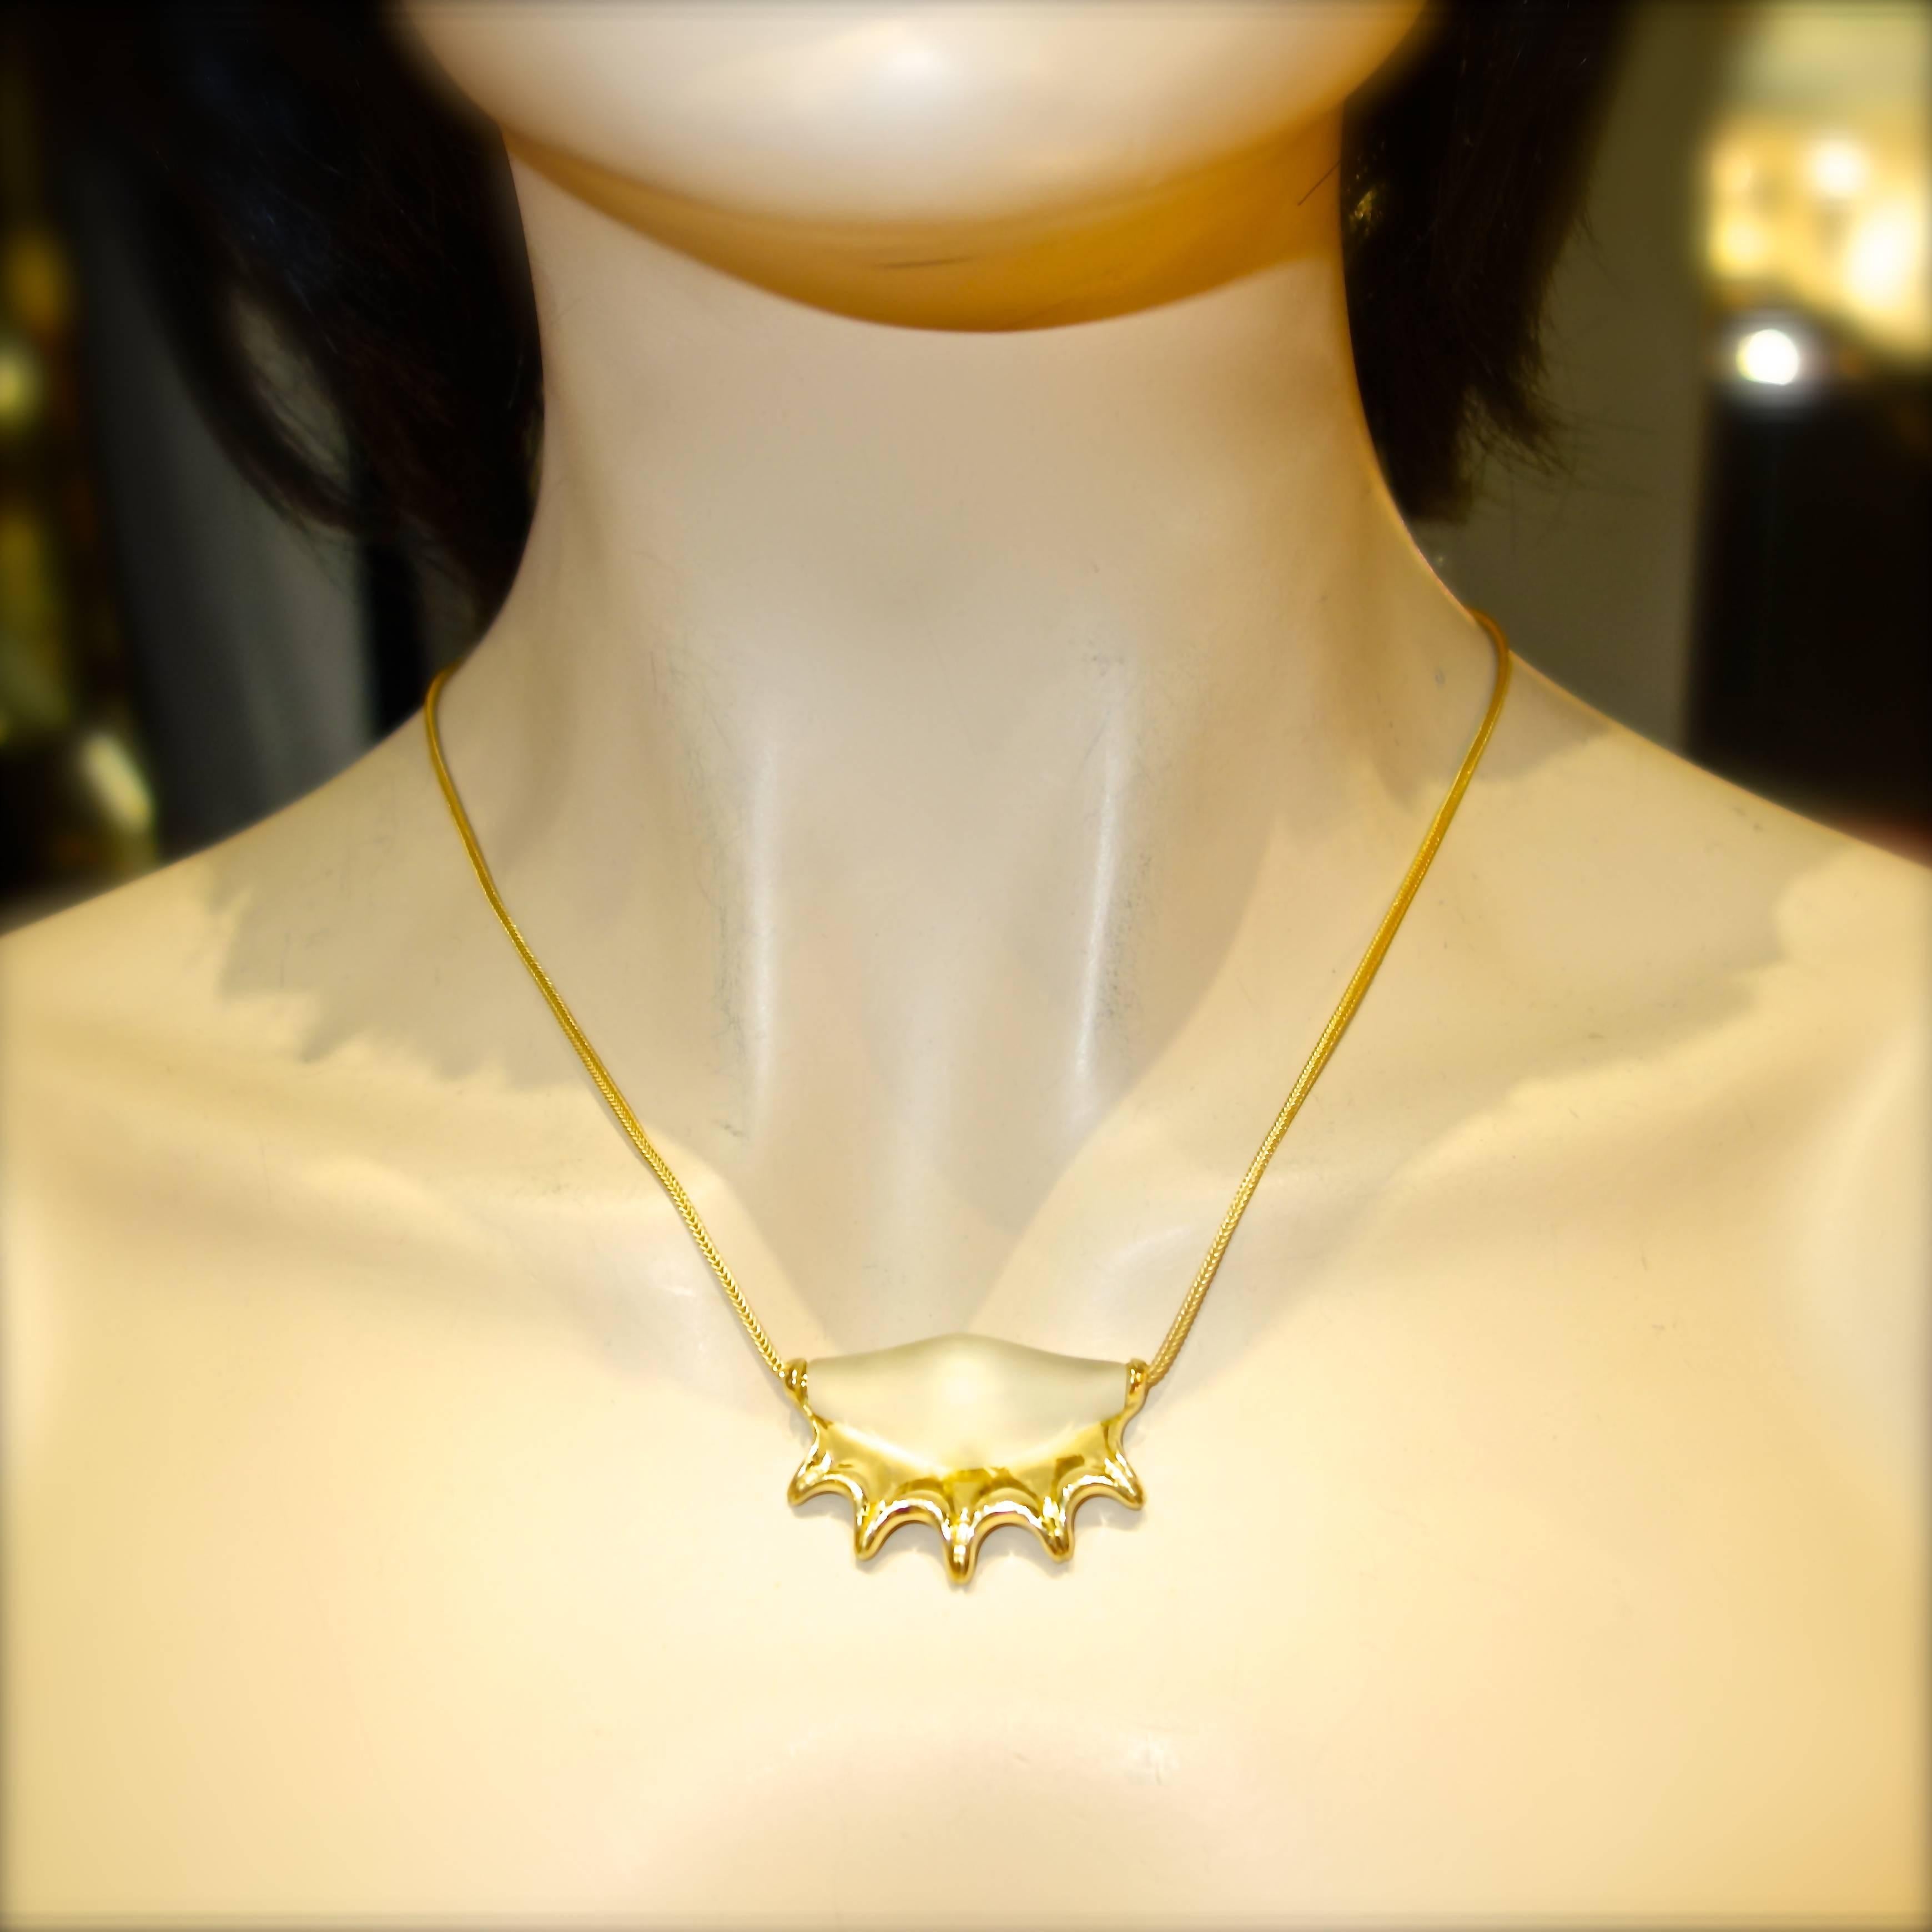 Ilias Lalaounis 18K gold necklace with a frosted rock crystal pendant, the rock crystal weighs approximately 10 cts., this designer piece is from the Athen's store and comes with the original receipt and pouch.  The foxtail chain is 15 inches long